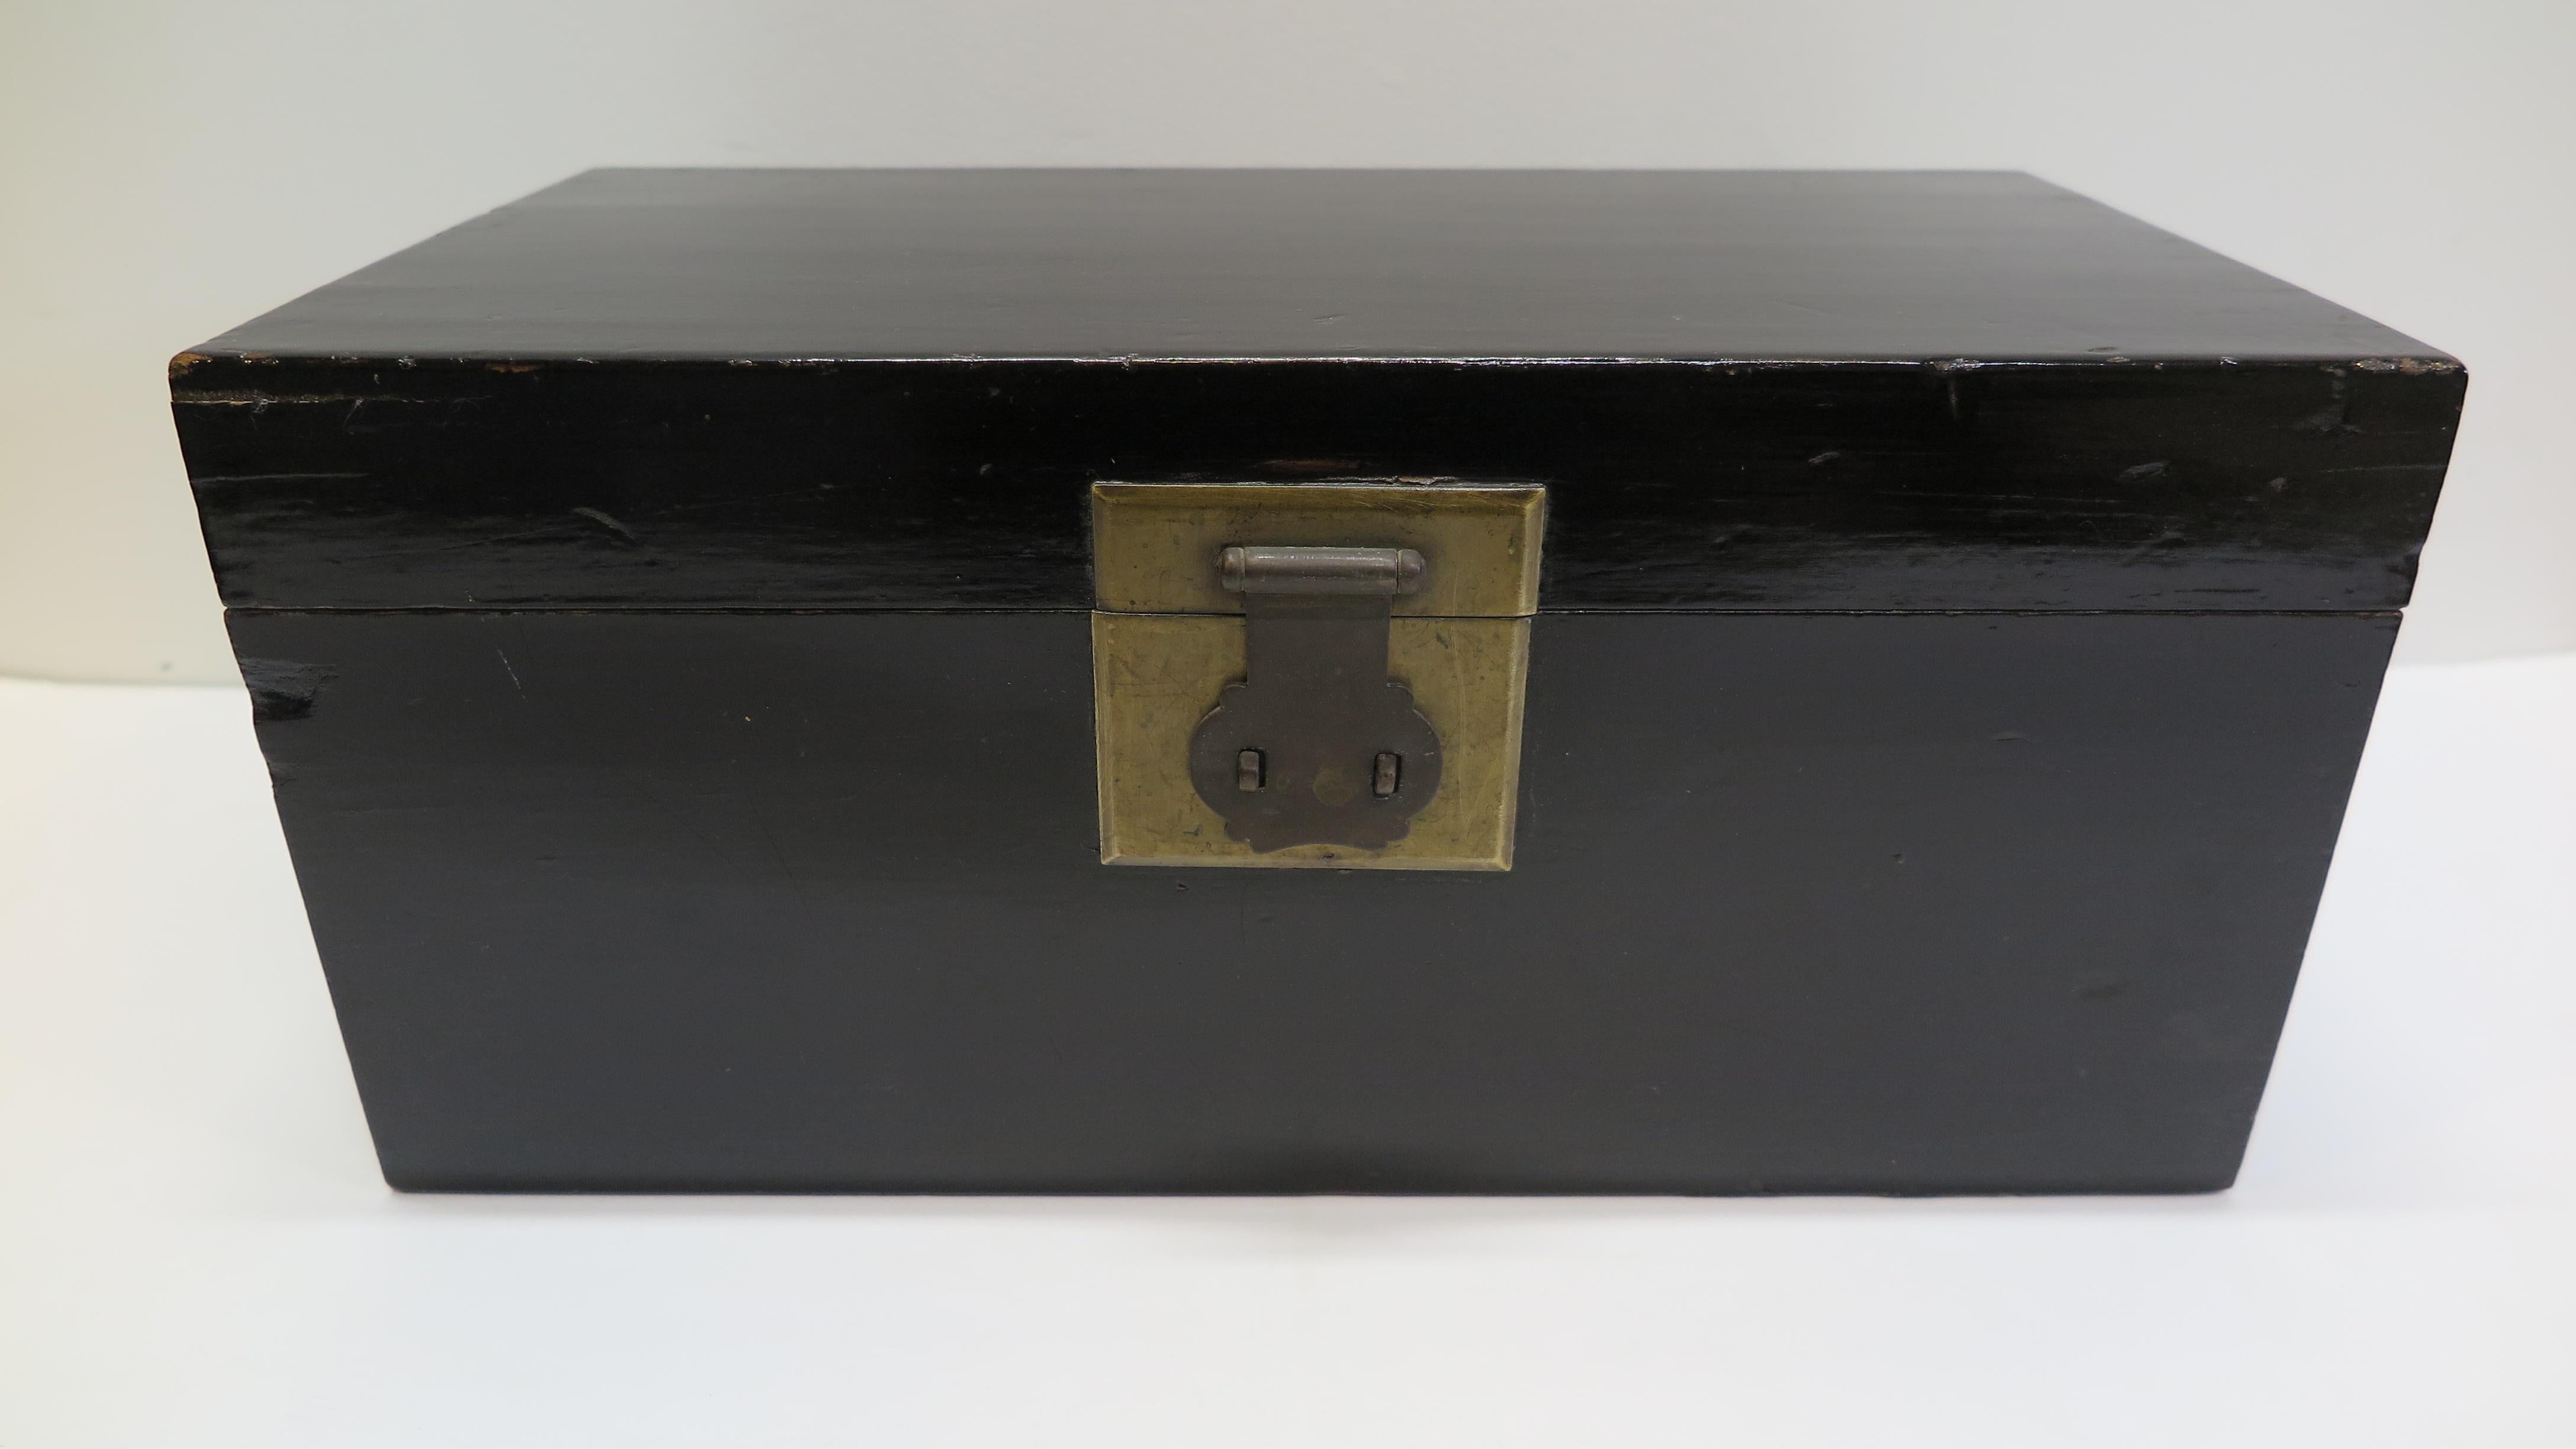 19th century Chinese black lacquered comfort box. Classic Chinese comfort box in black lacquer with top shelf lower compartment having bronze badge hardware and handles with bumpers on each side. Used for personal objects such as jewelry. Nicely